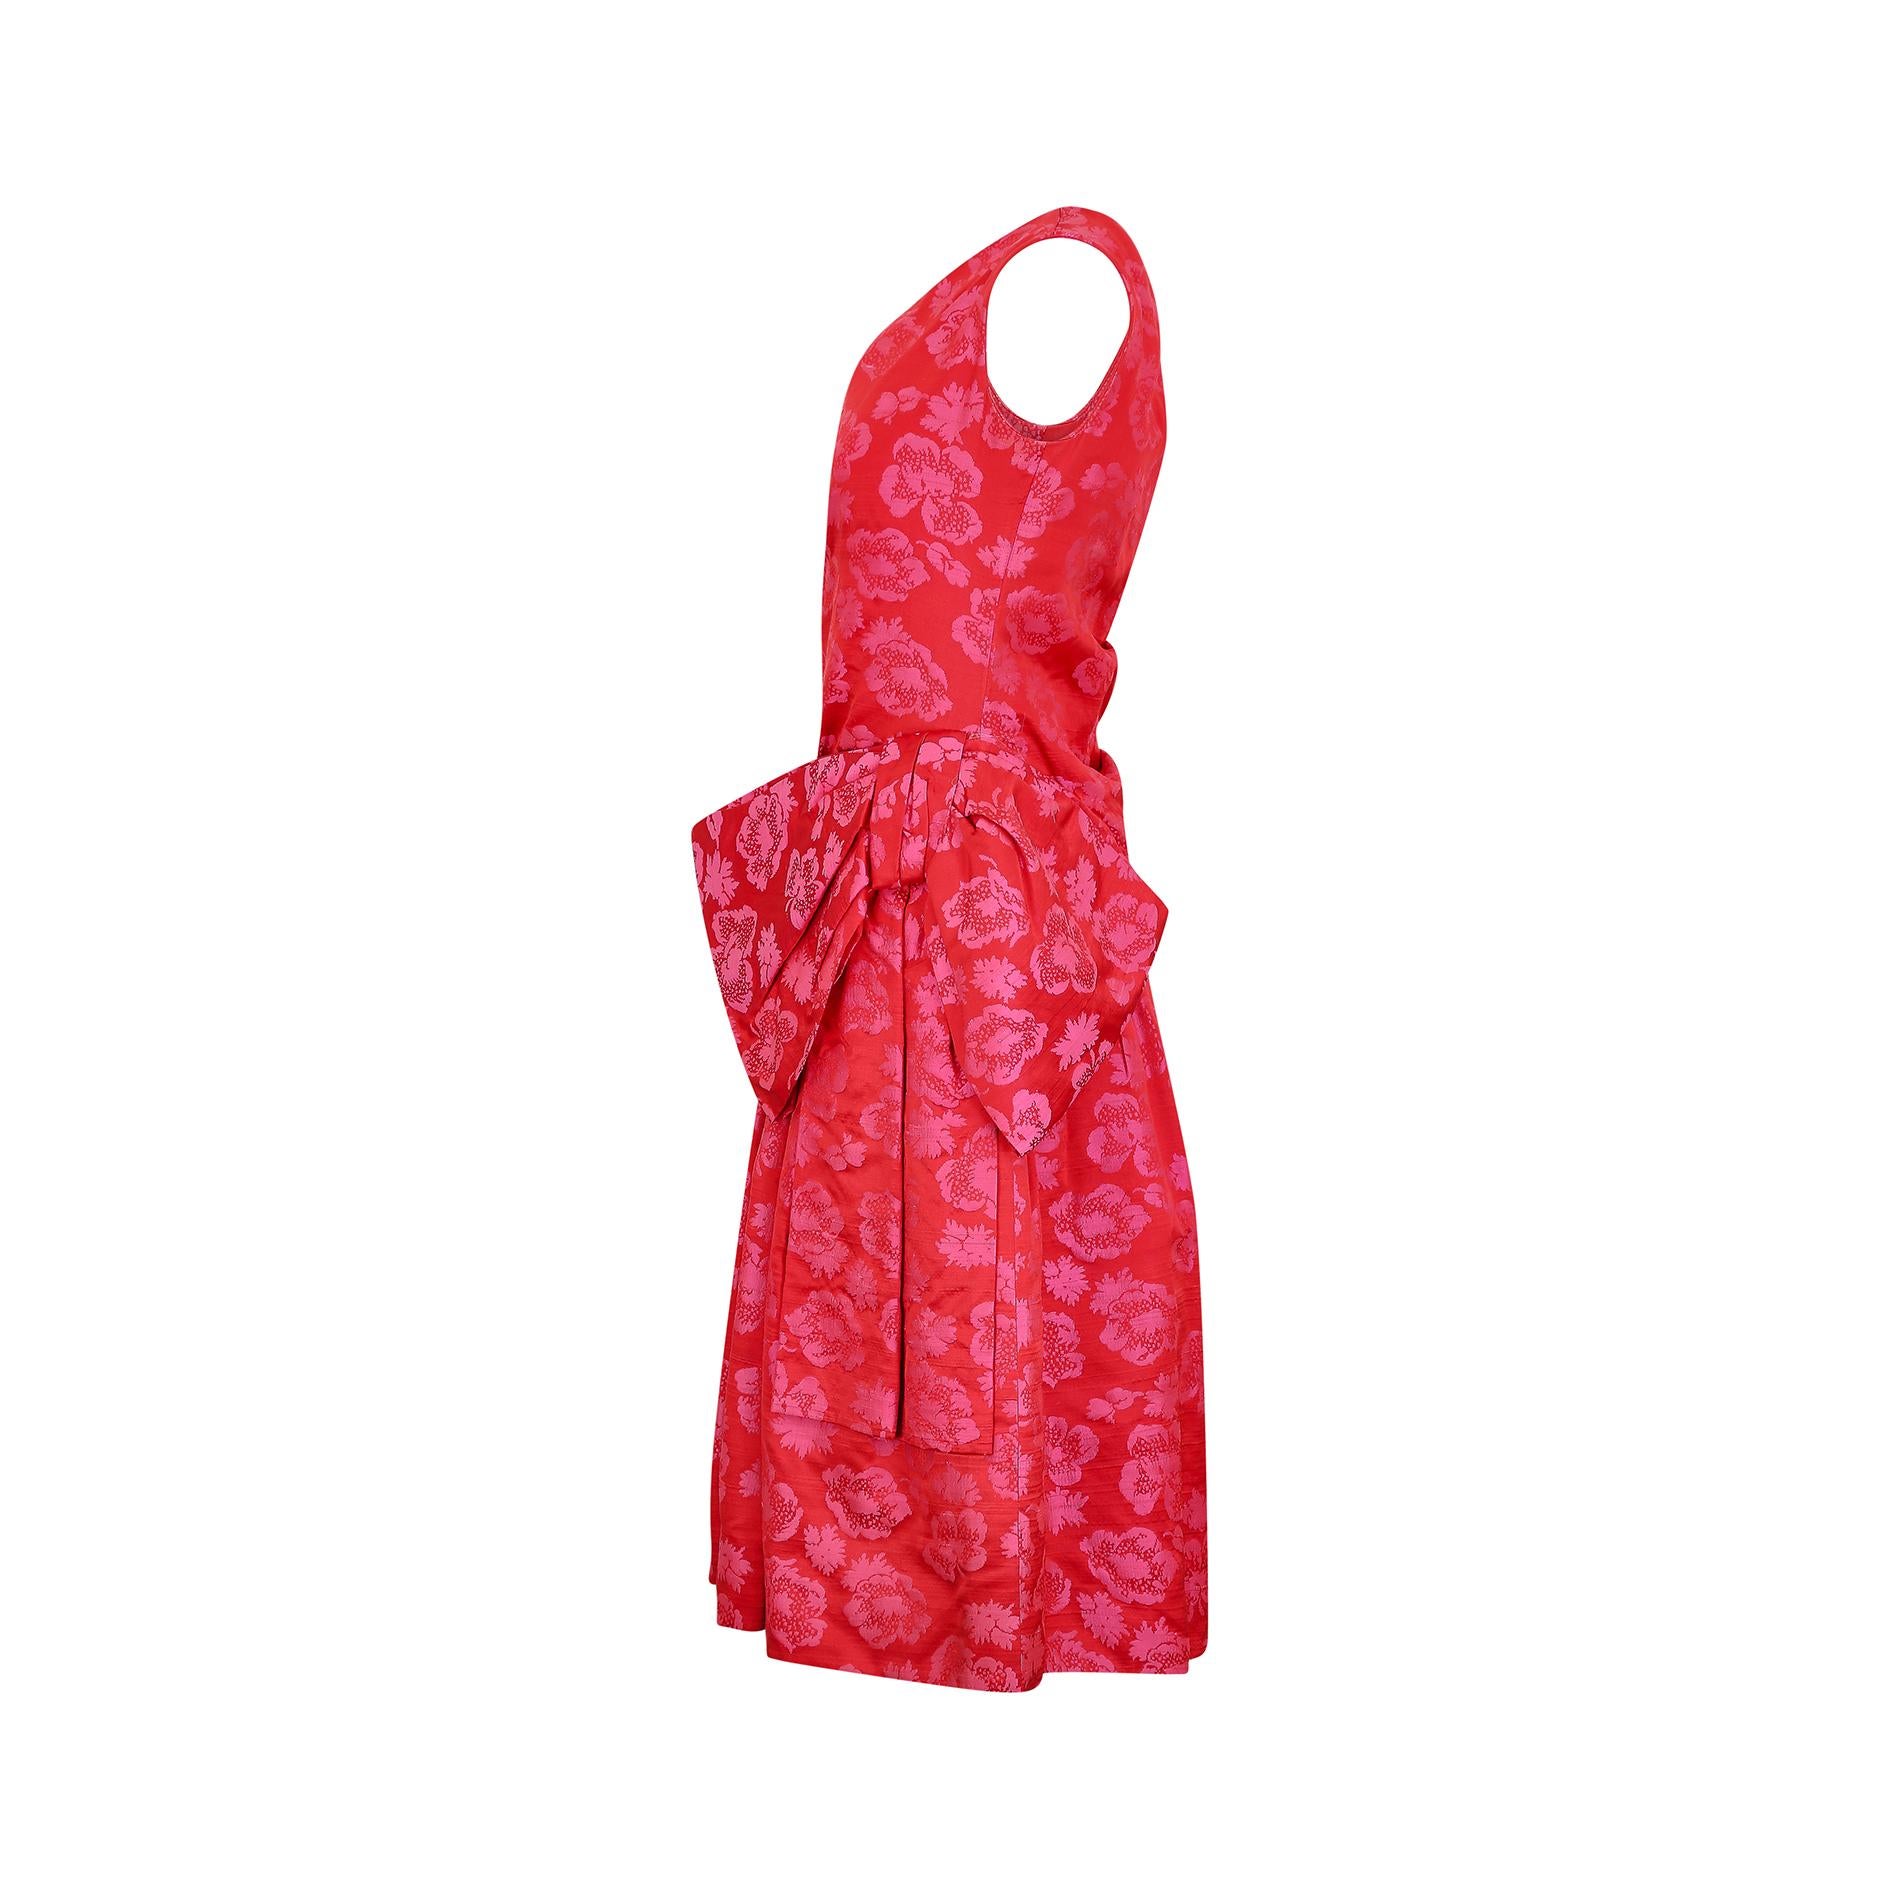 1950s Christian Dior Paris Pink Silk Damask Dress In Excellent Condition For Sale In London, GB